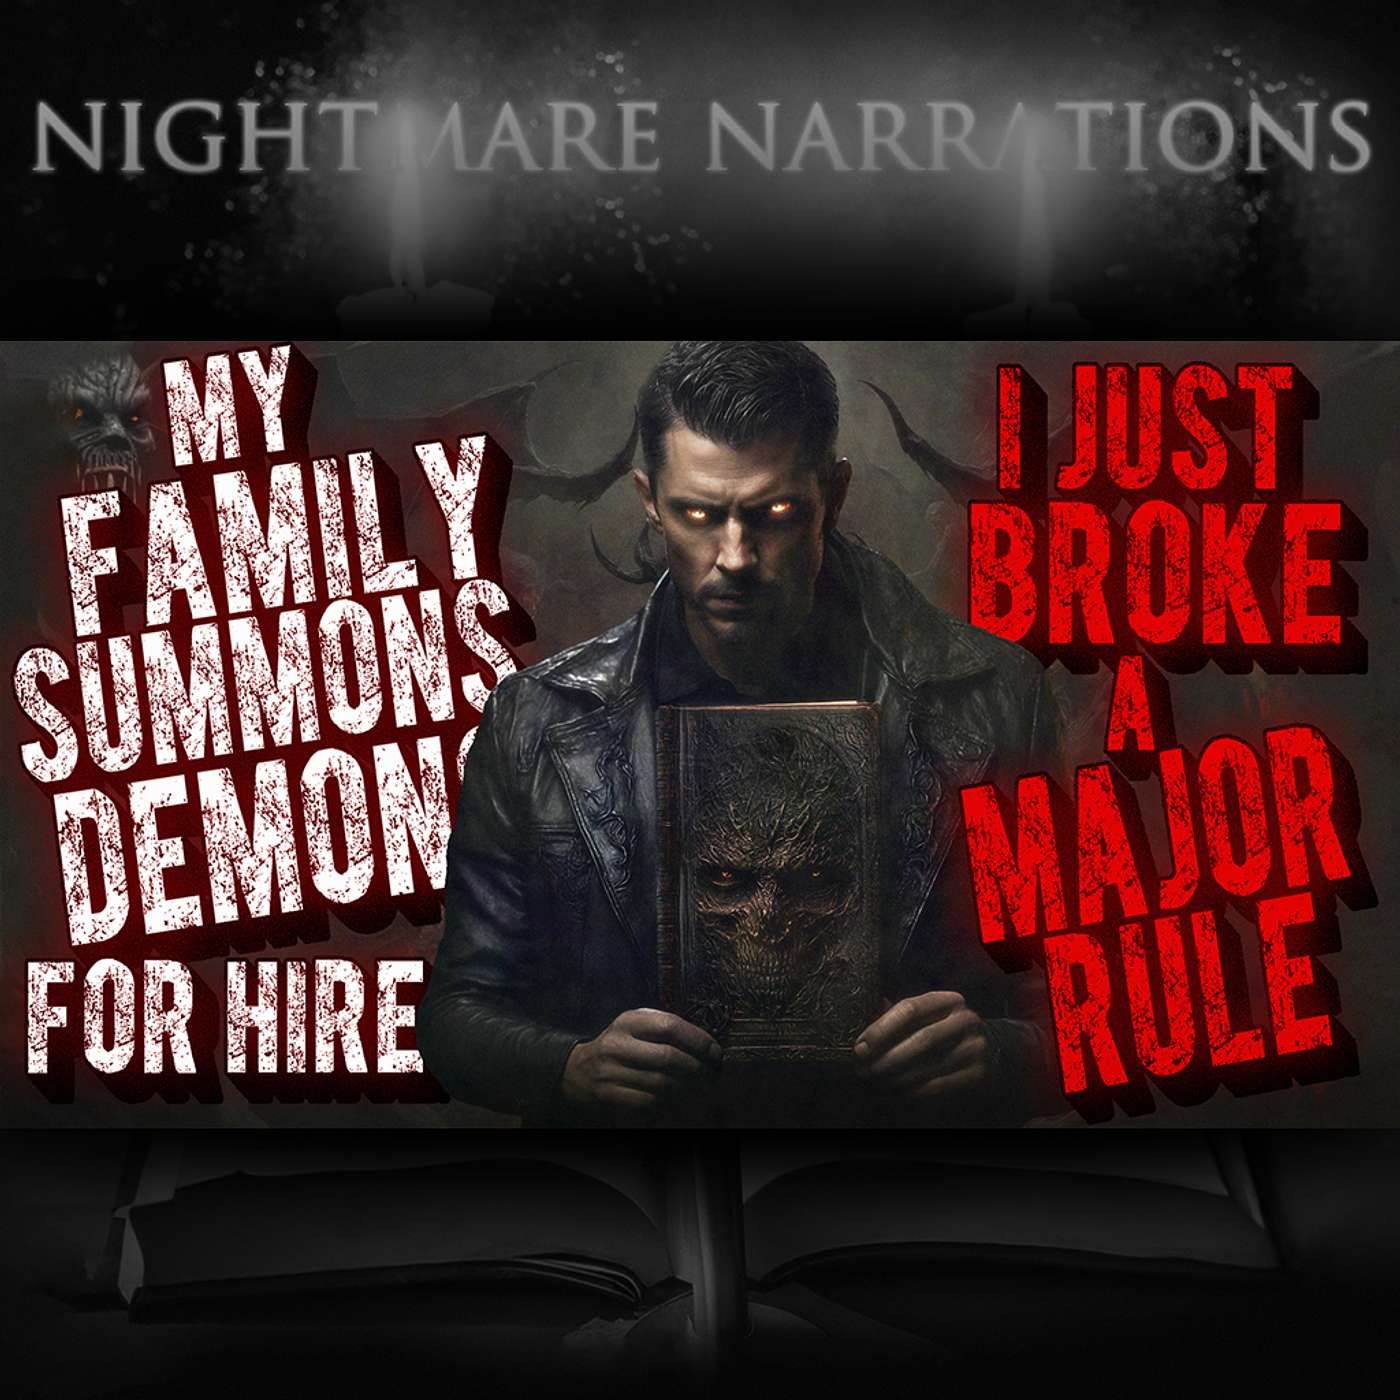 My Family Summons Demons for Hire. I Just Broke a Major Rule.- Scary Story - Nightmare Narration